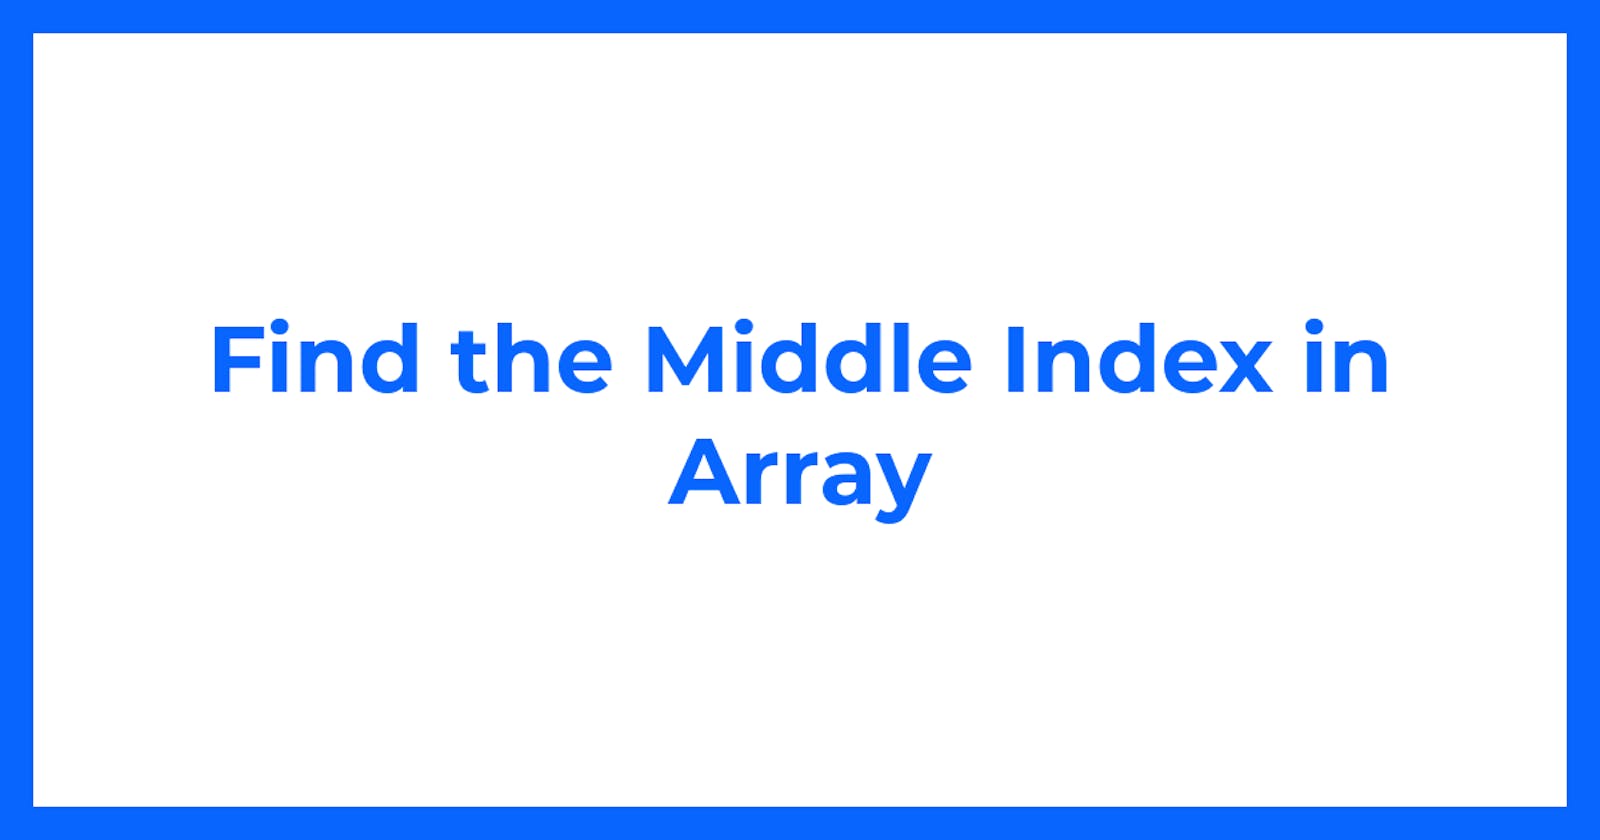 Find the Middle Index in Array